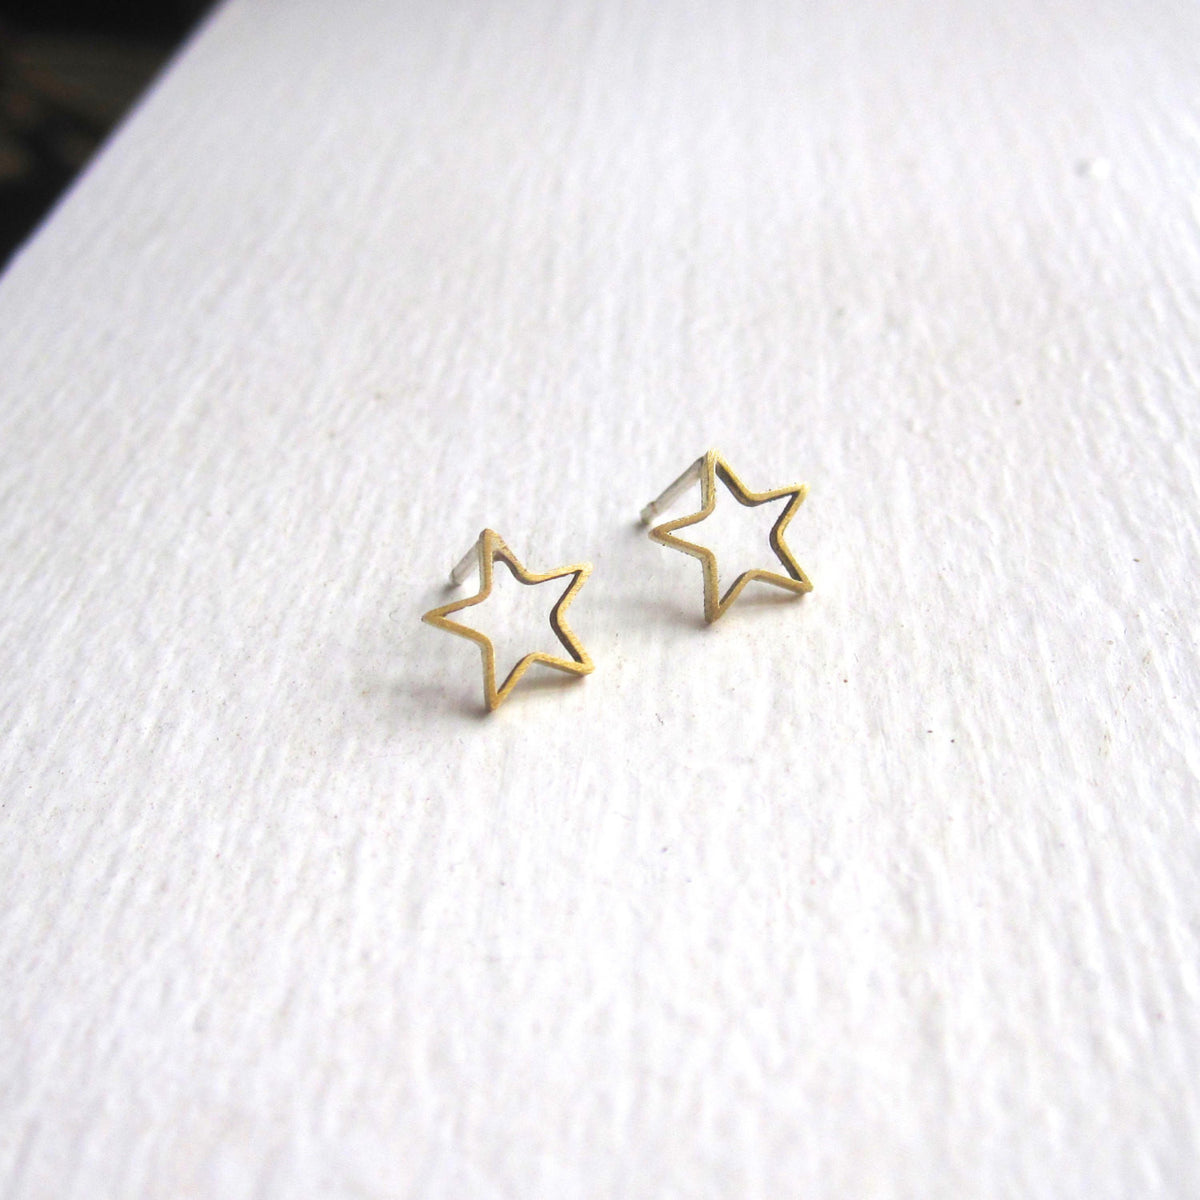 Beautiful and Chic Gold Colored Hand-Made Brass Open Star Studs - 0187 - Virginia Wynne Designs